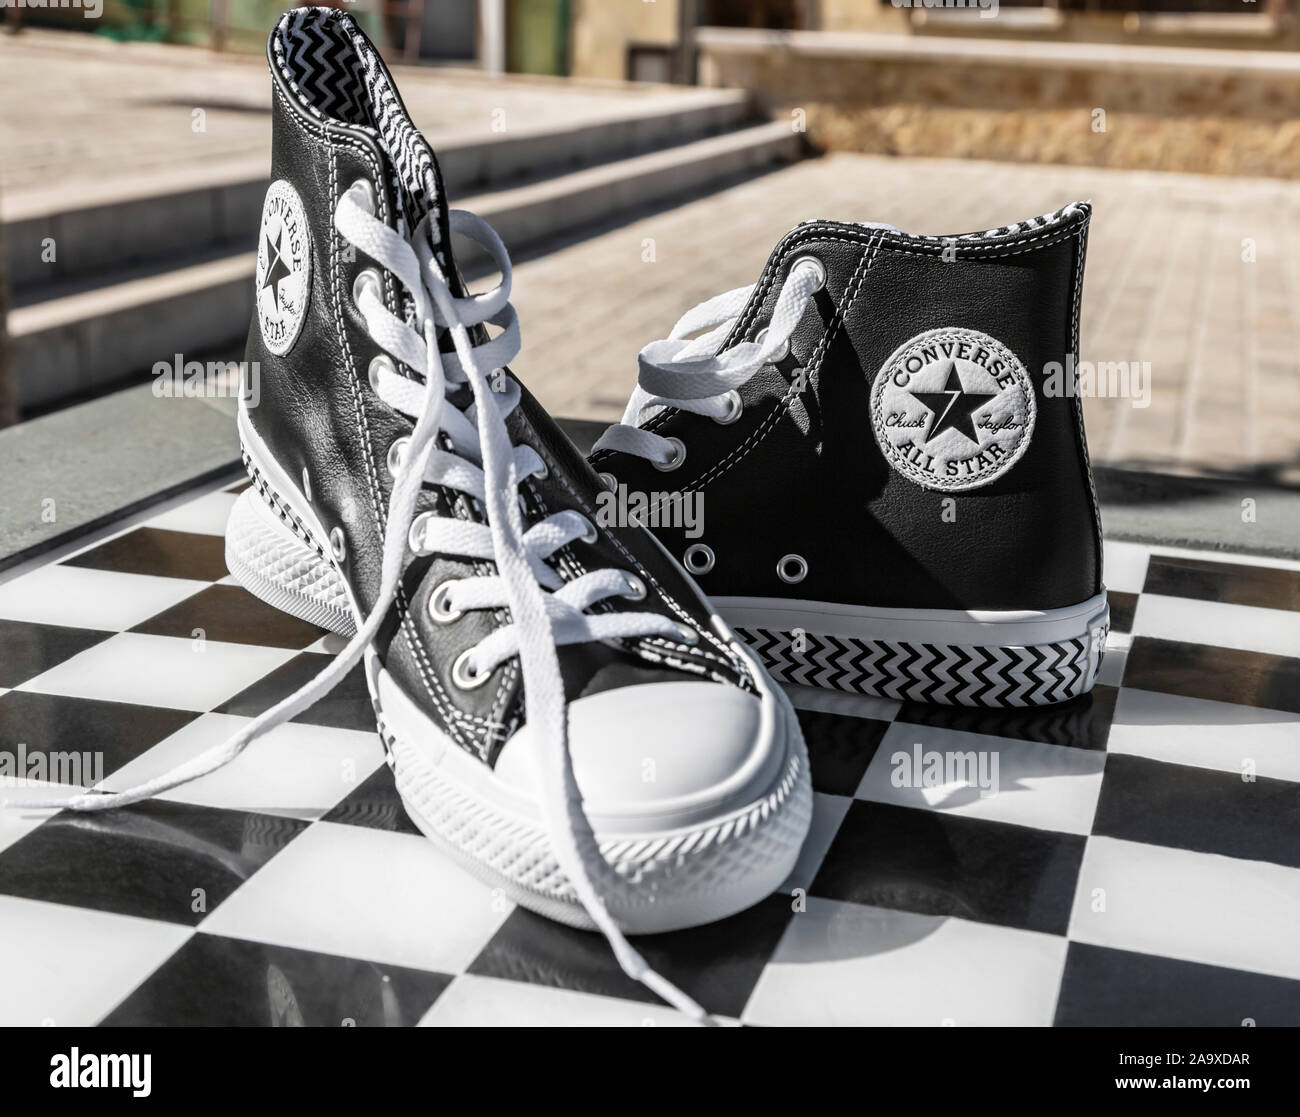 Chartres, France - Spetember 2, 2019: Image of a pair of All Star Converse  sneakers on a cobblestone street Stock Photo - Alamy